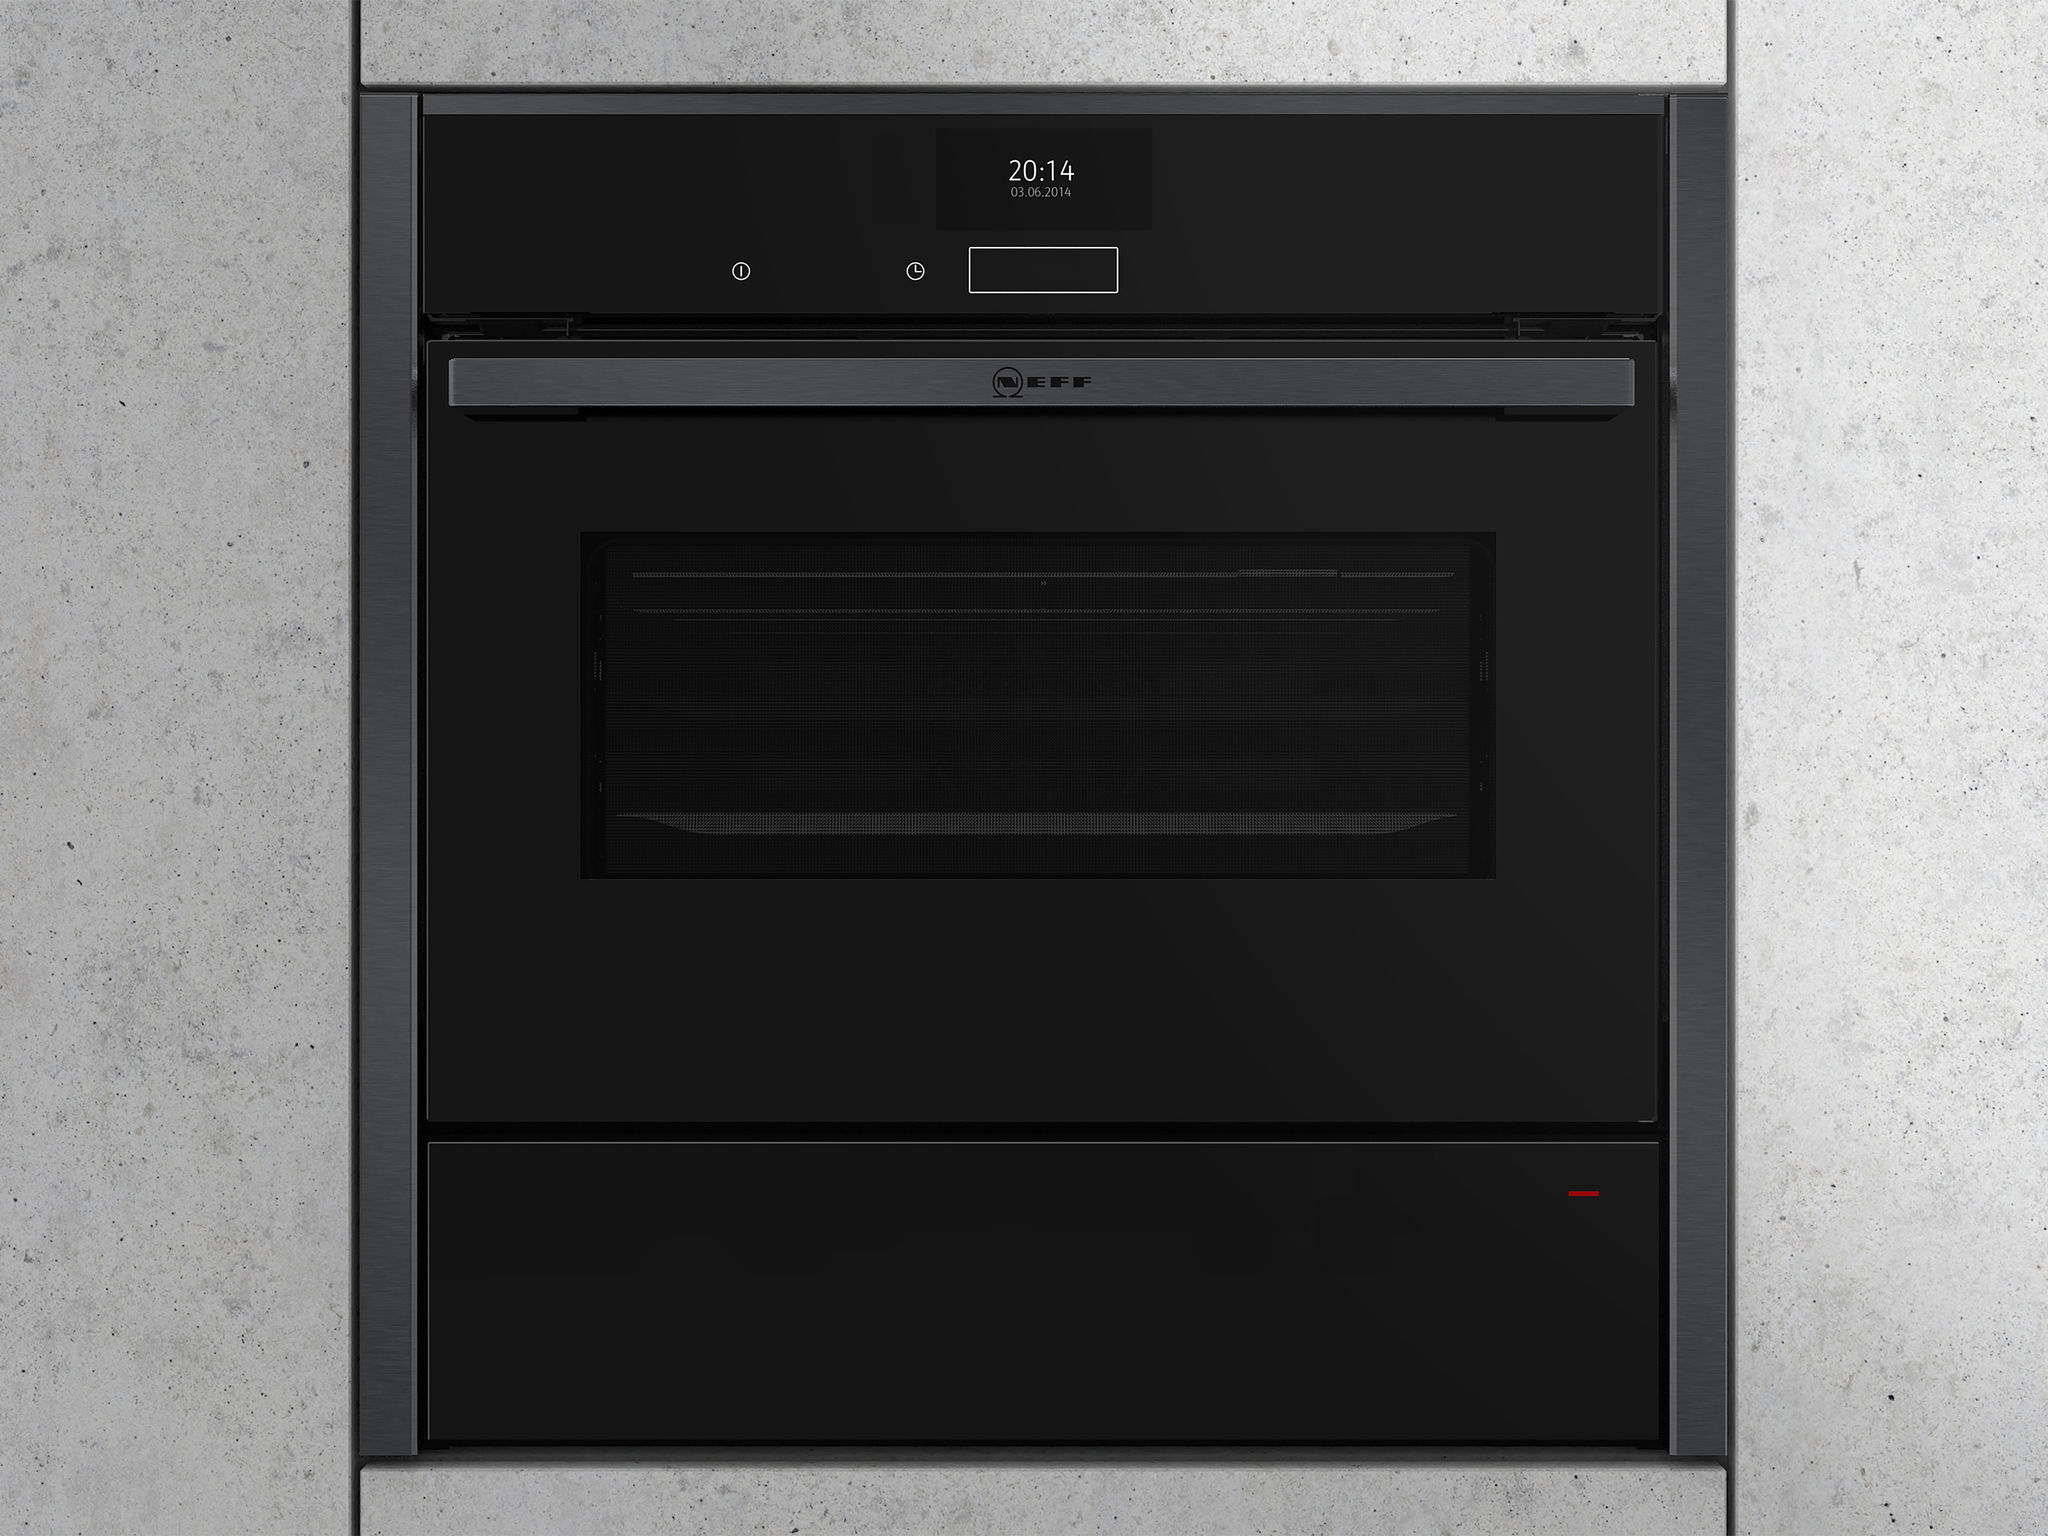 NEFF N70 Compact Oven NEFF N70 Warming Drawer Seamless Combination